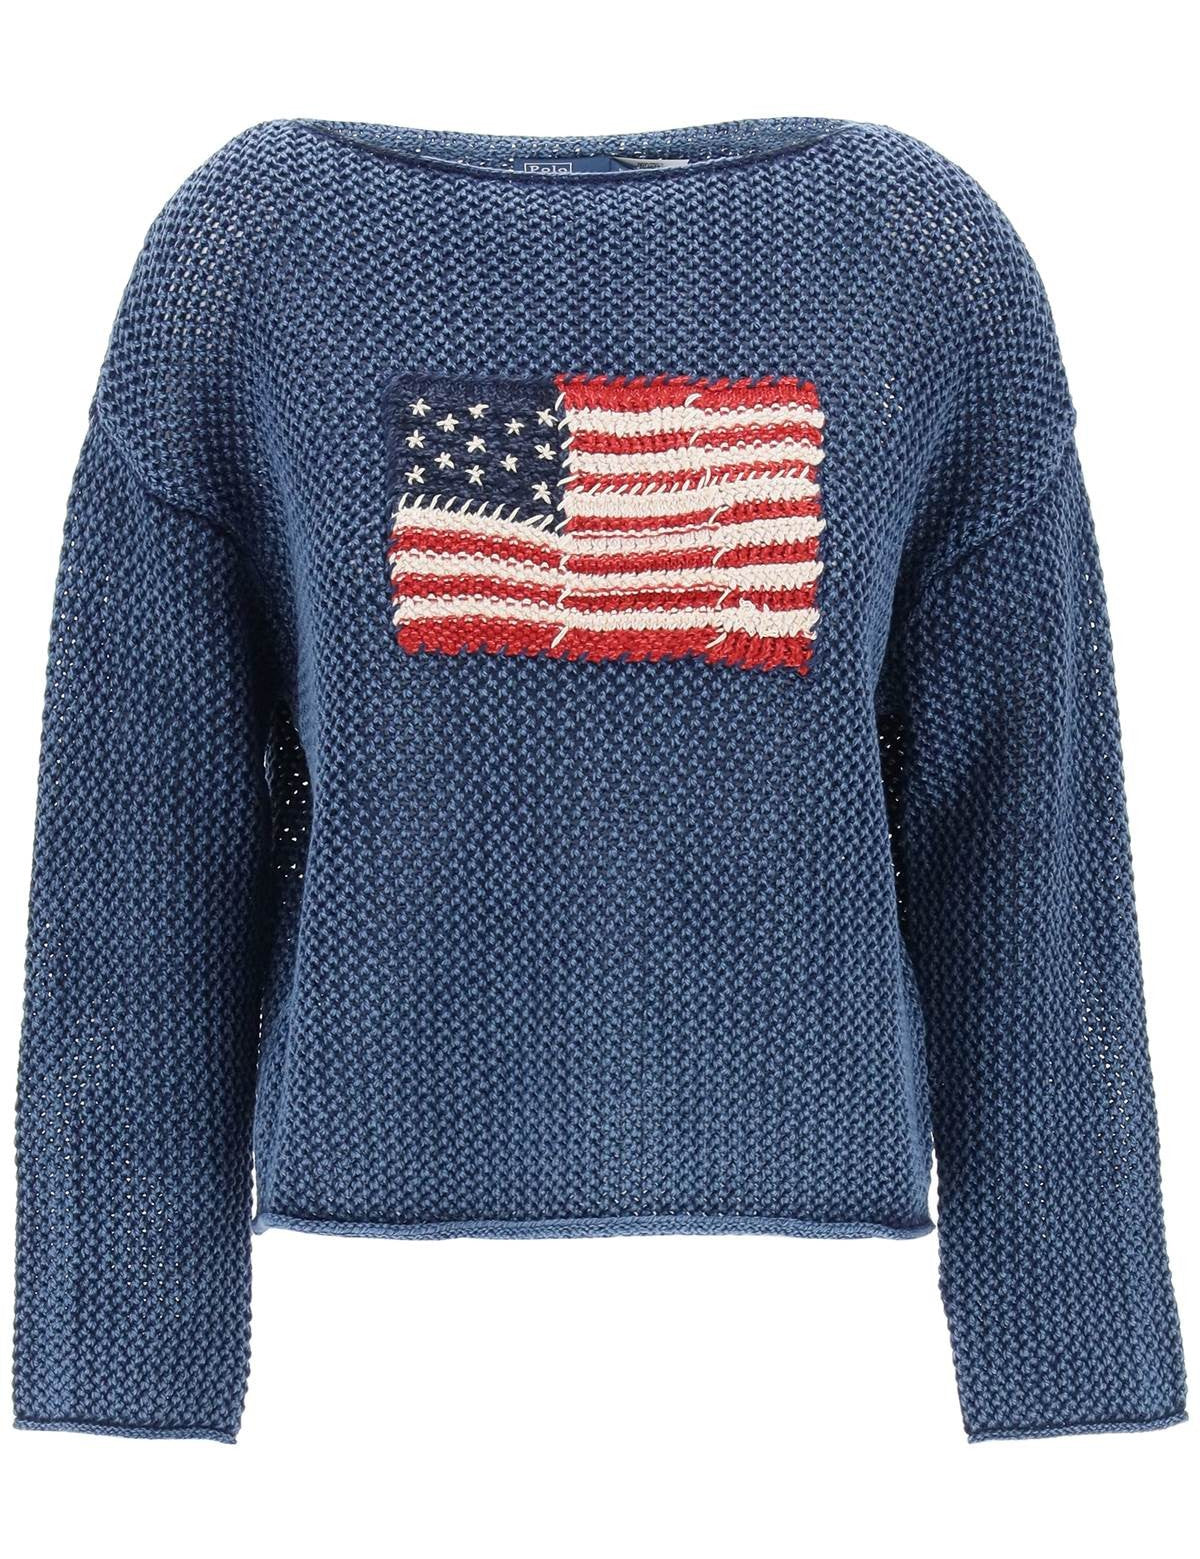 pointelle-knit-pullover-with-embroidered-flag.jpg